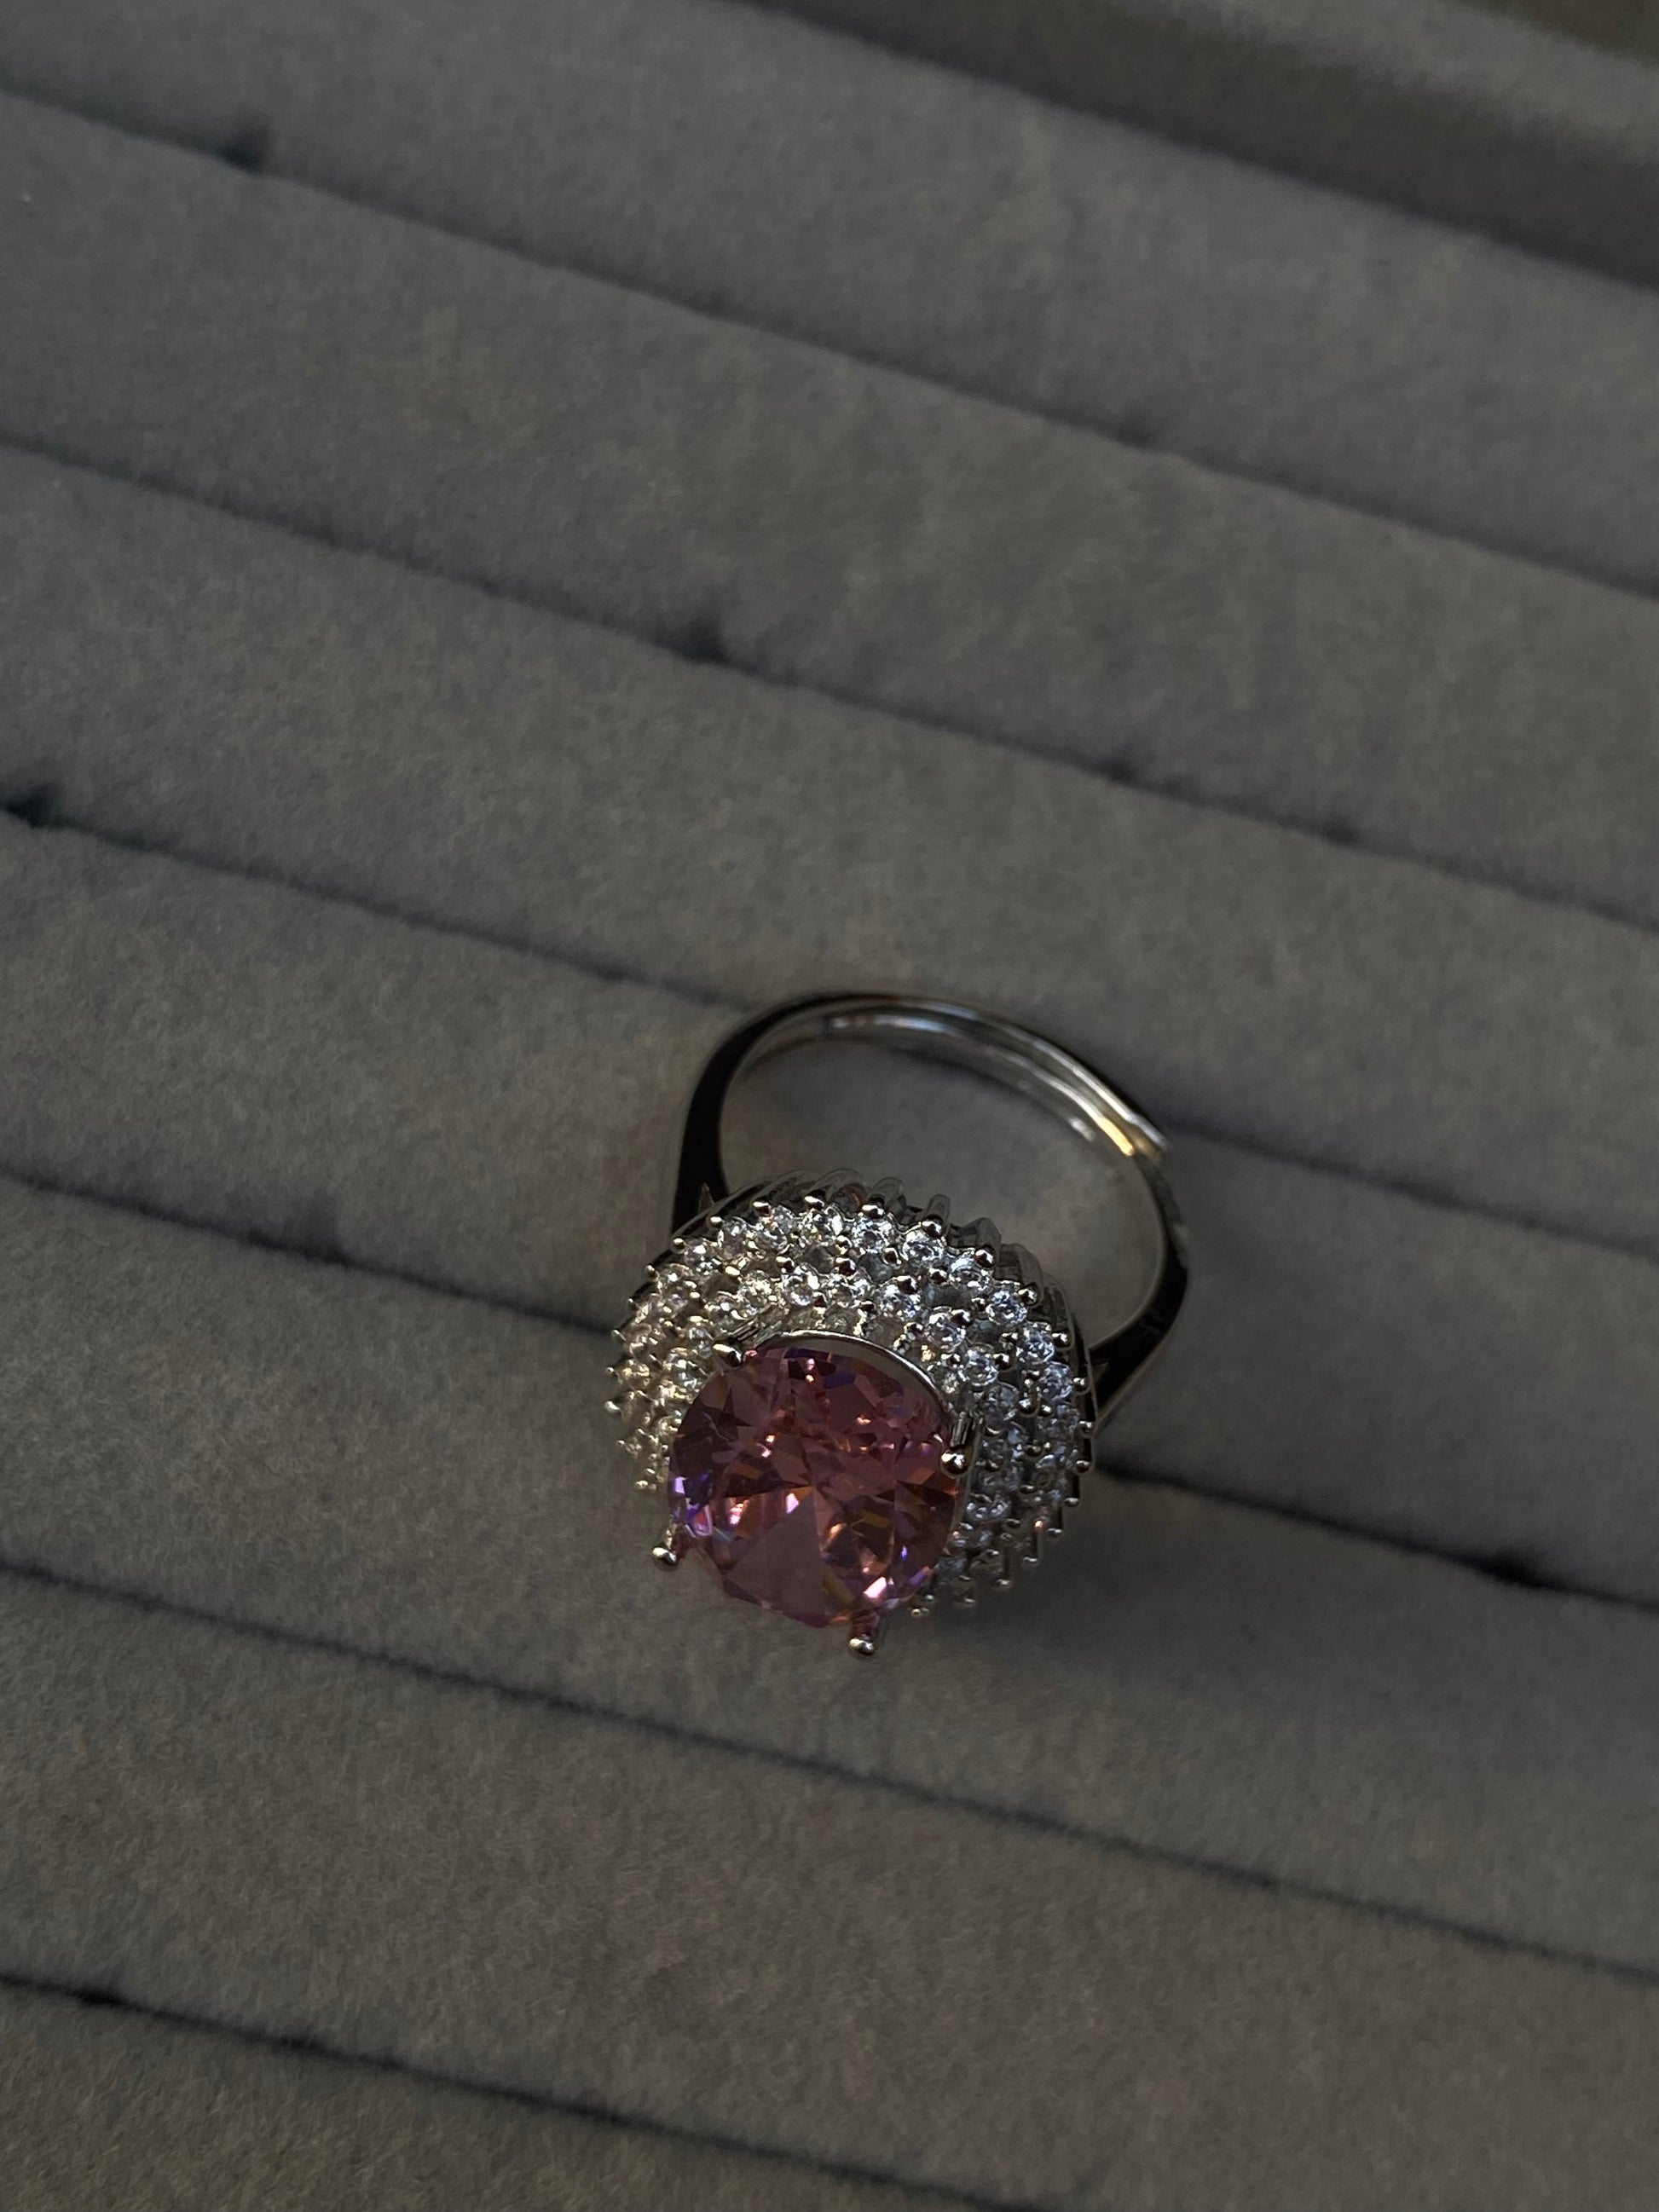 Pink Oval Ring (Adjustable Size)